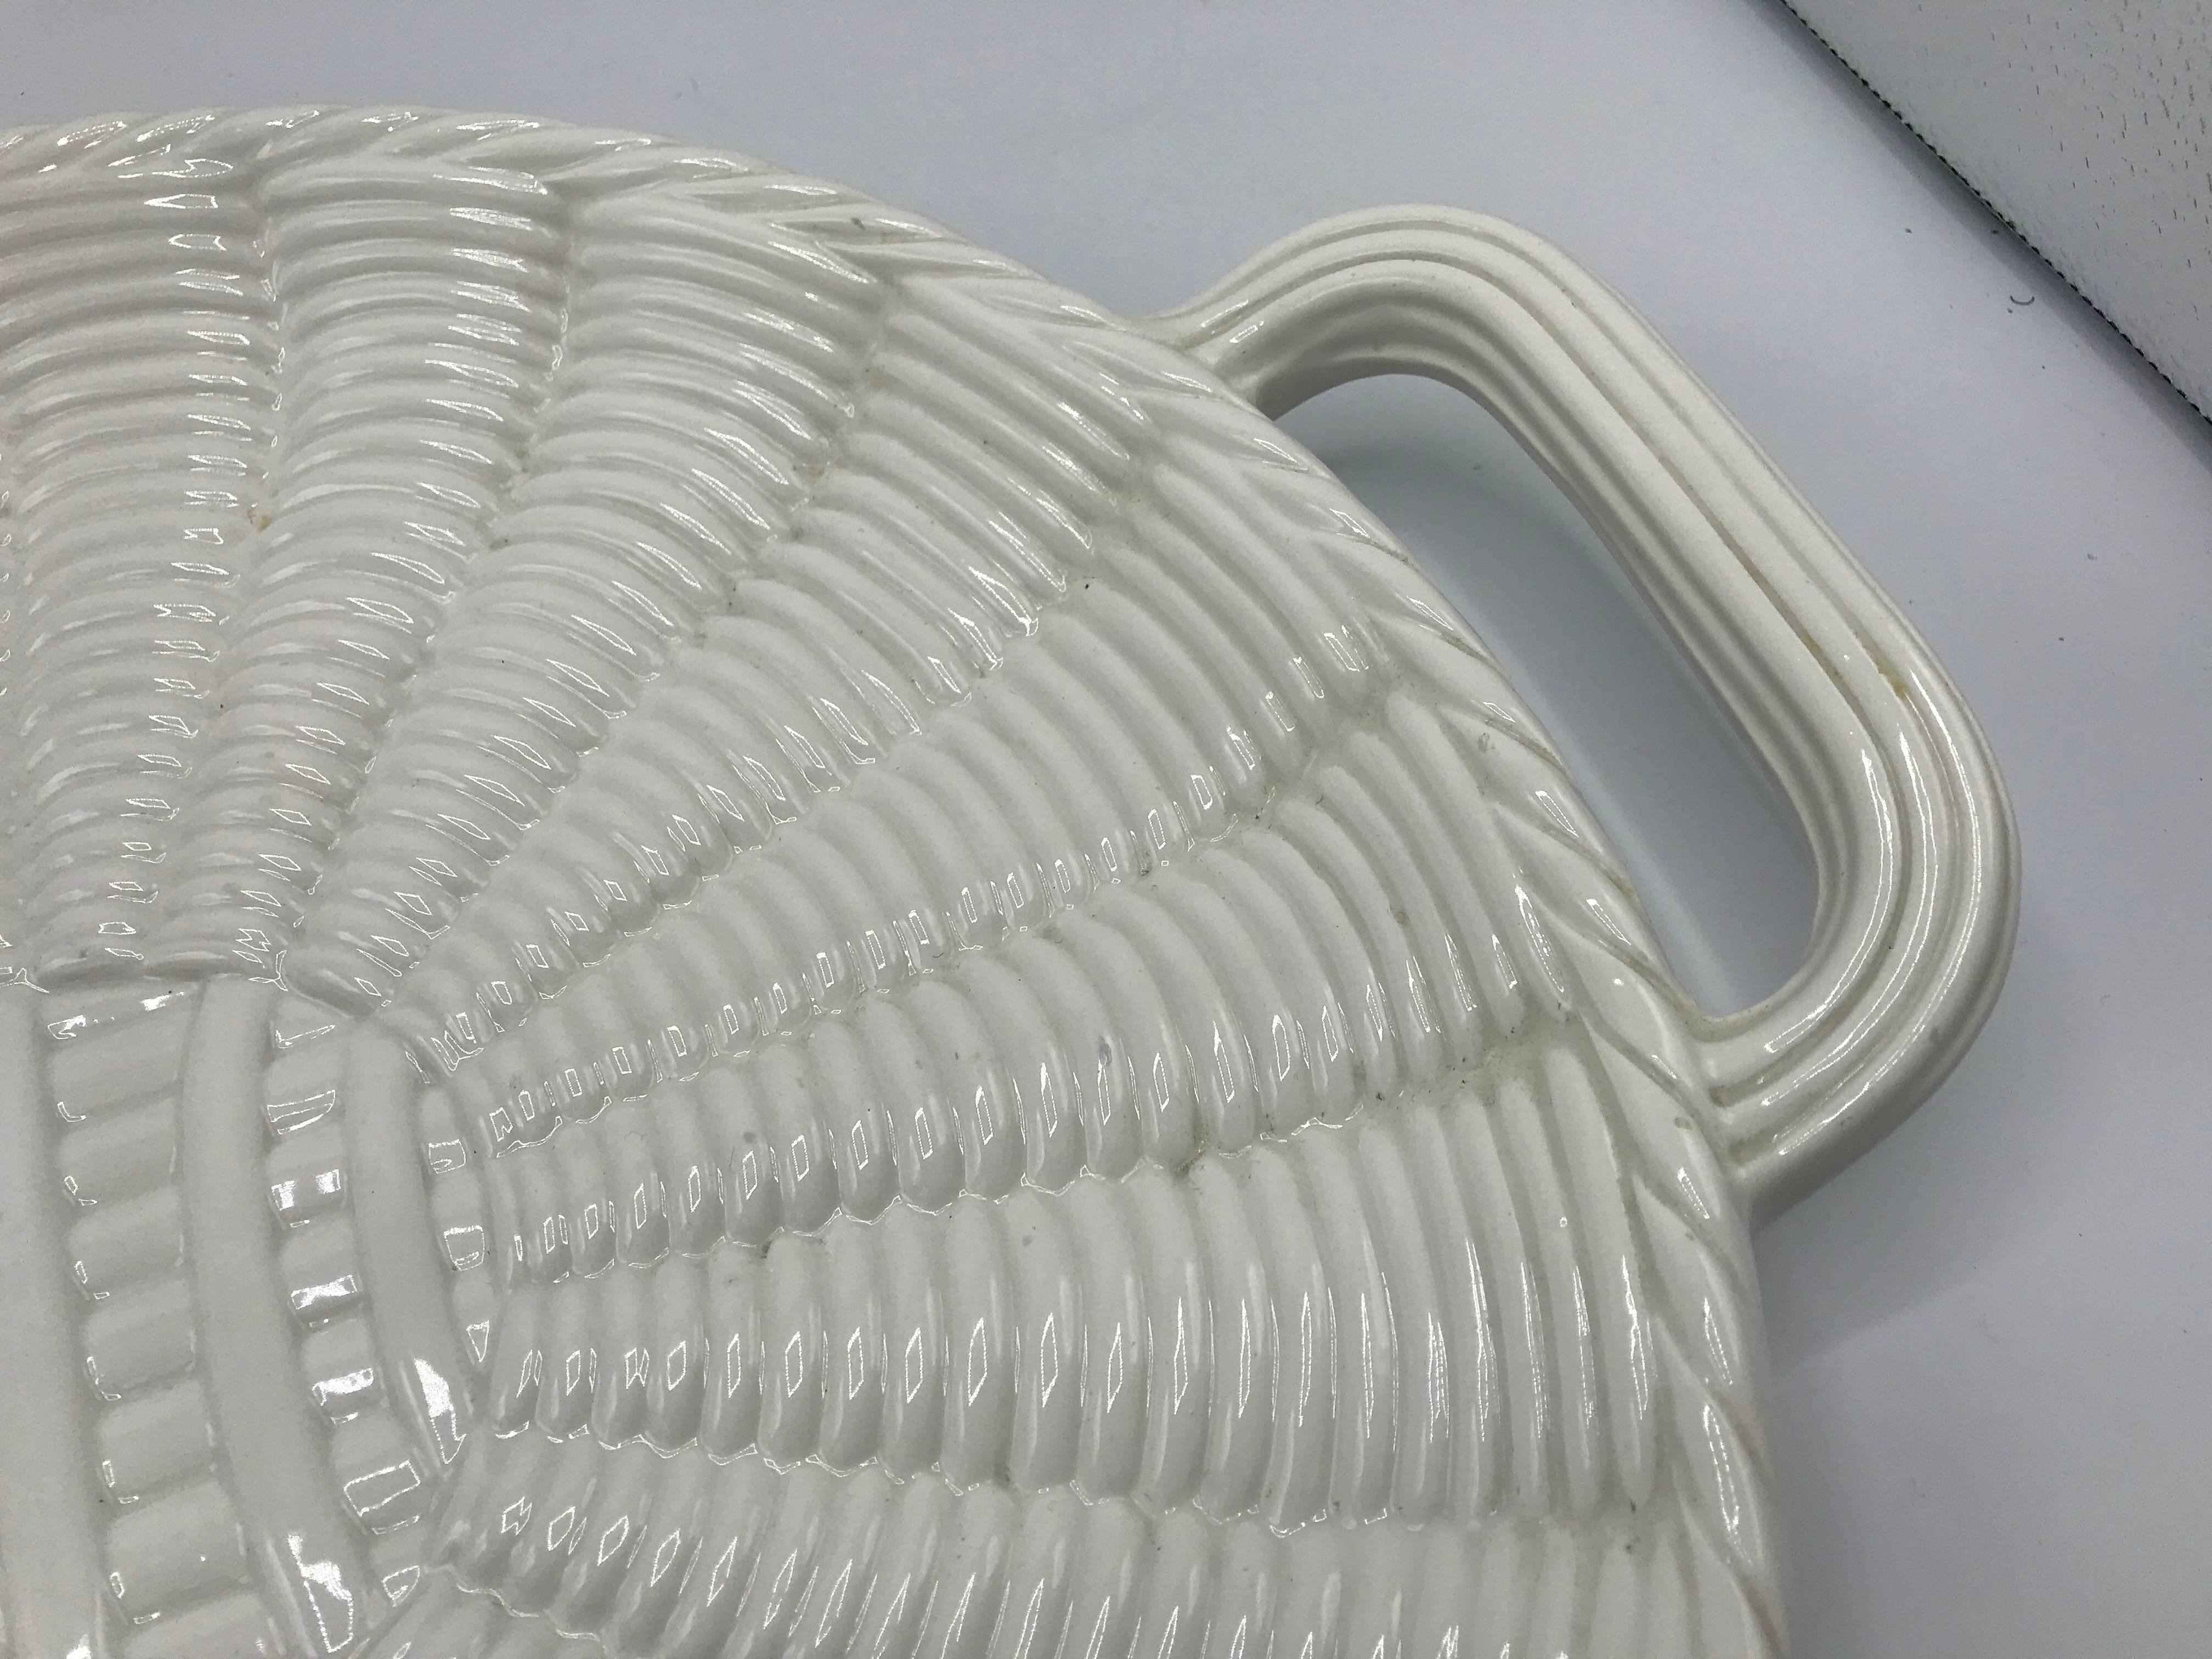 Glazed 1960s Italian Saks Fifth Avenue White Ceramic Basket Weave Serving Tray Charger